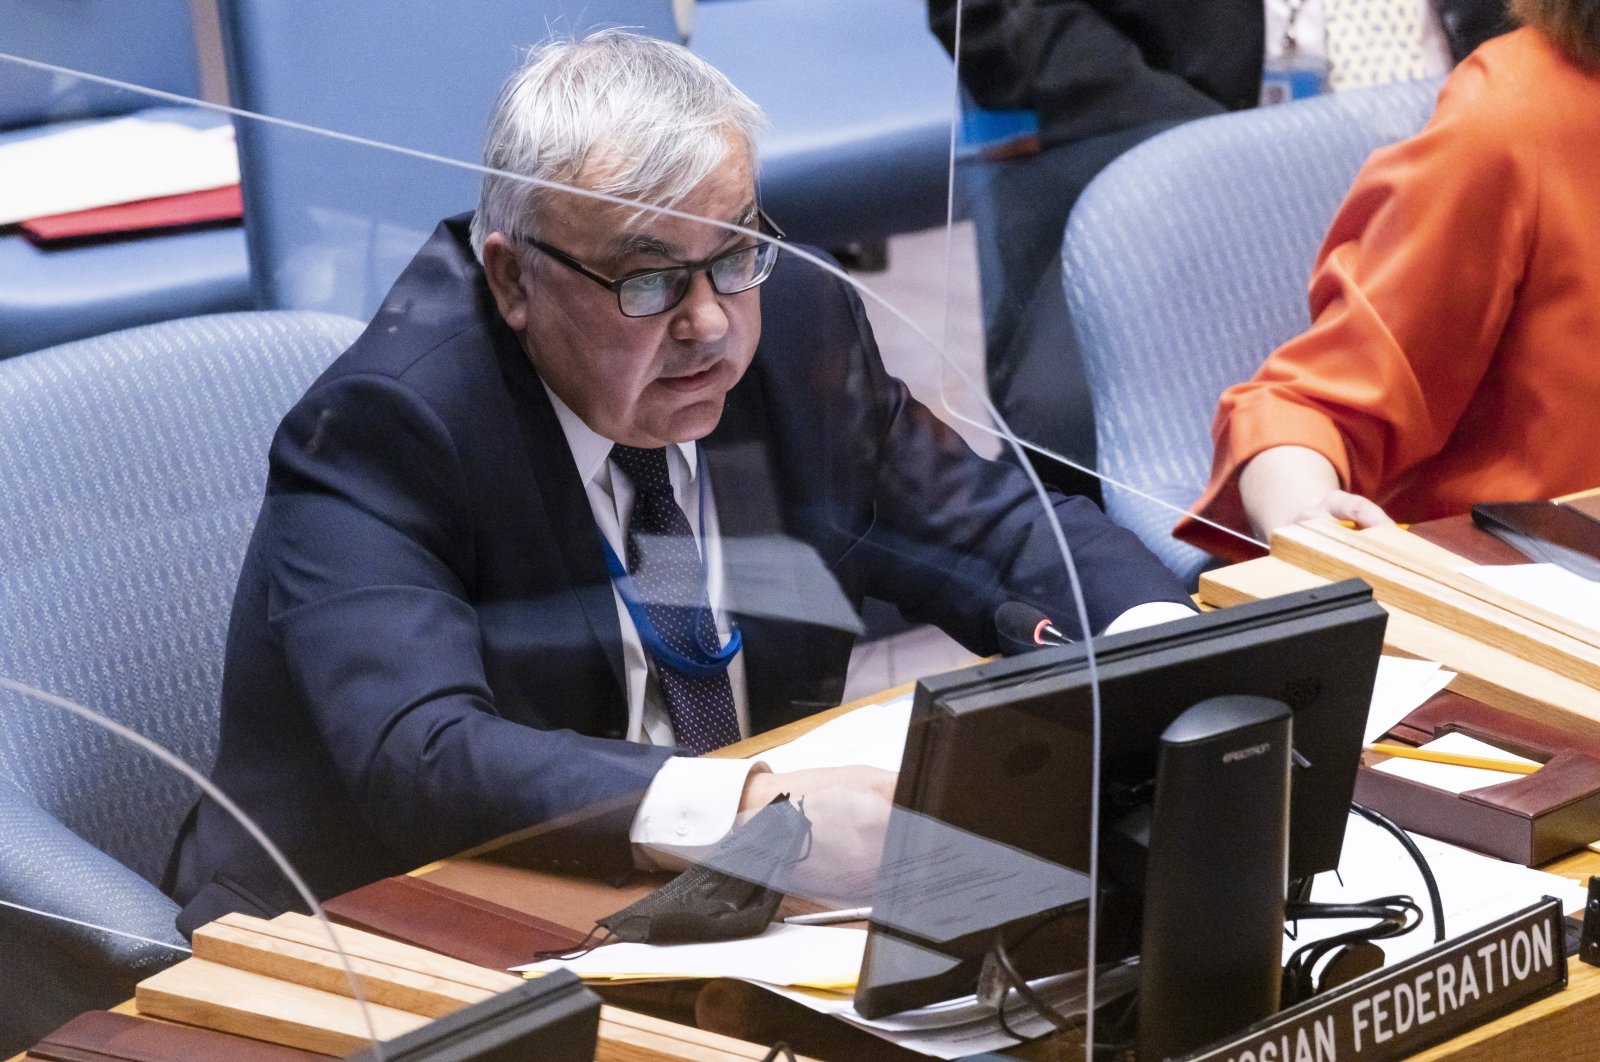 Russia&#039;s Deputy Foreign Minister Sergey Vershinin addresses a United Nations Security Council meeting on the tensions between Ukraine and Russia at United Nations headquarters in New York, New York, USA, 17 February 2022. (EPA Photo)